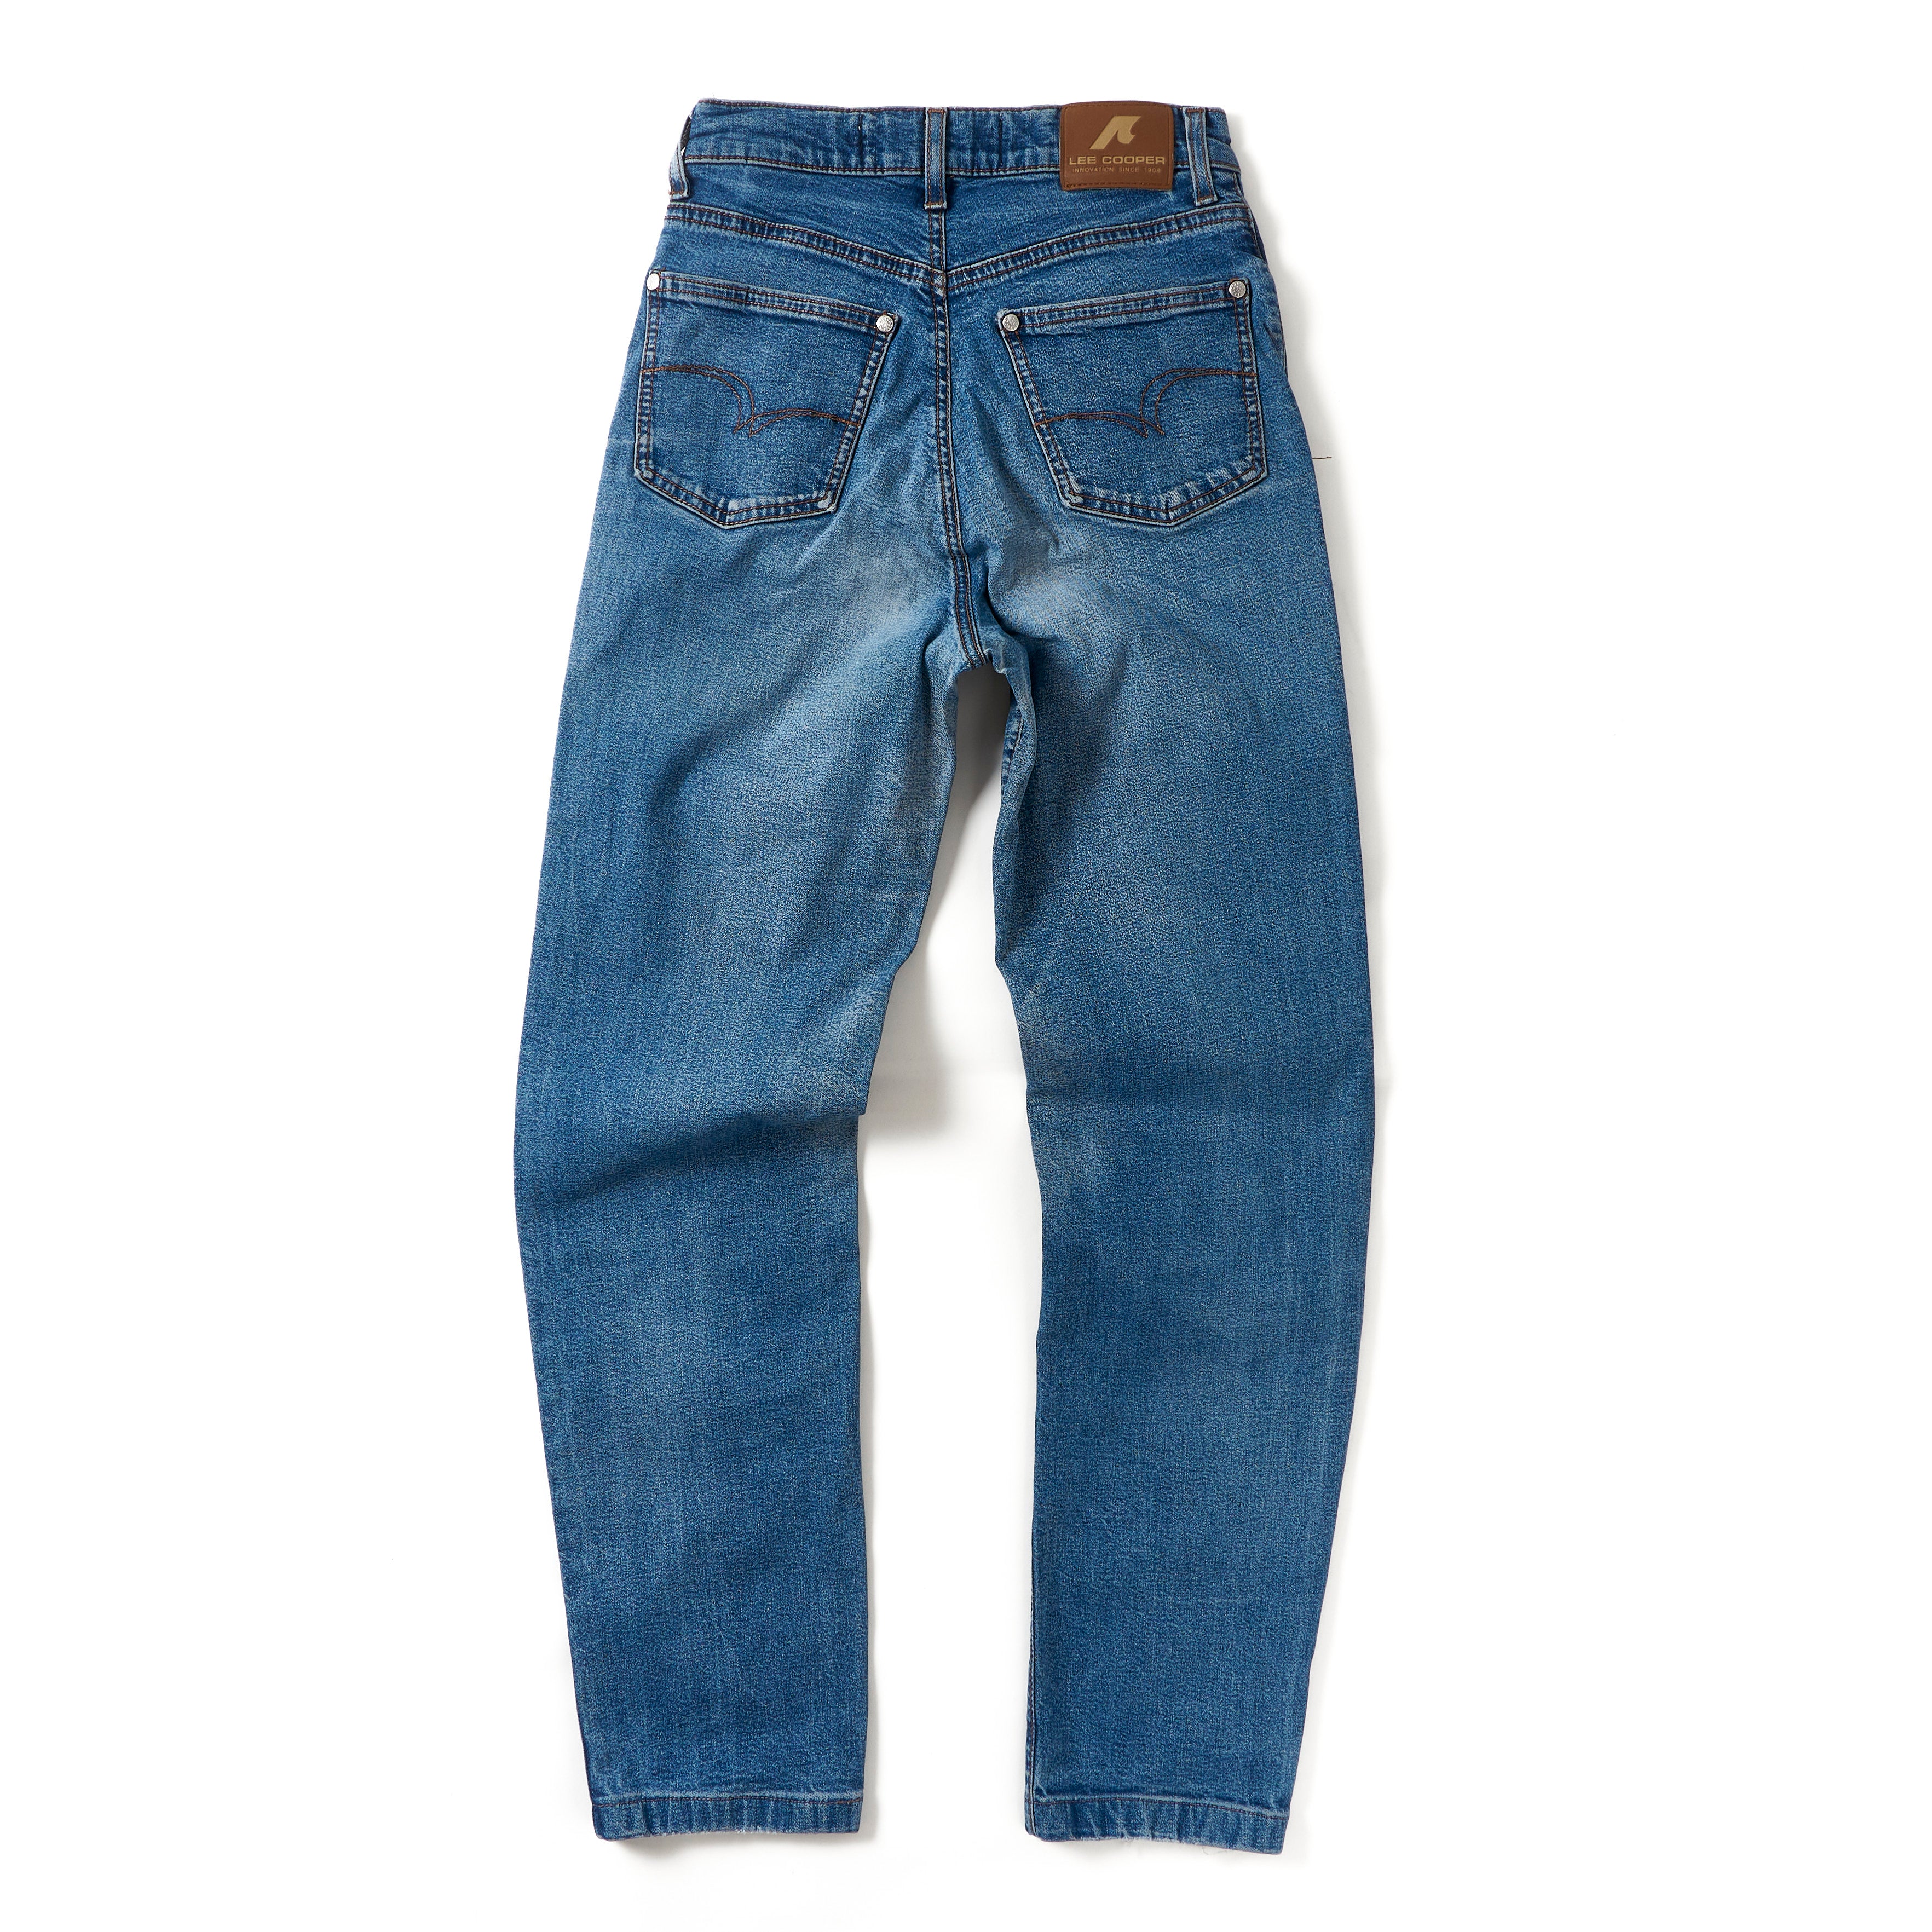 Buy Lee Cooper Jeans Online In India At Best Price Offers | Tata CLiQ